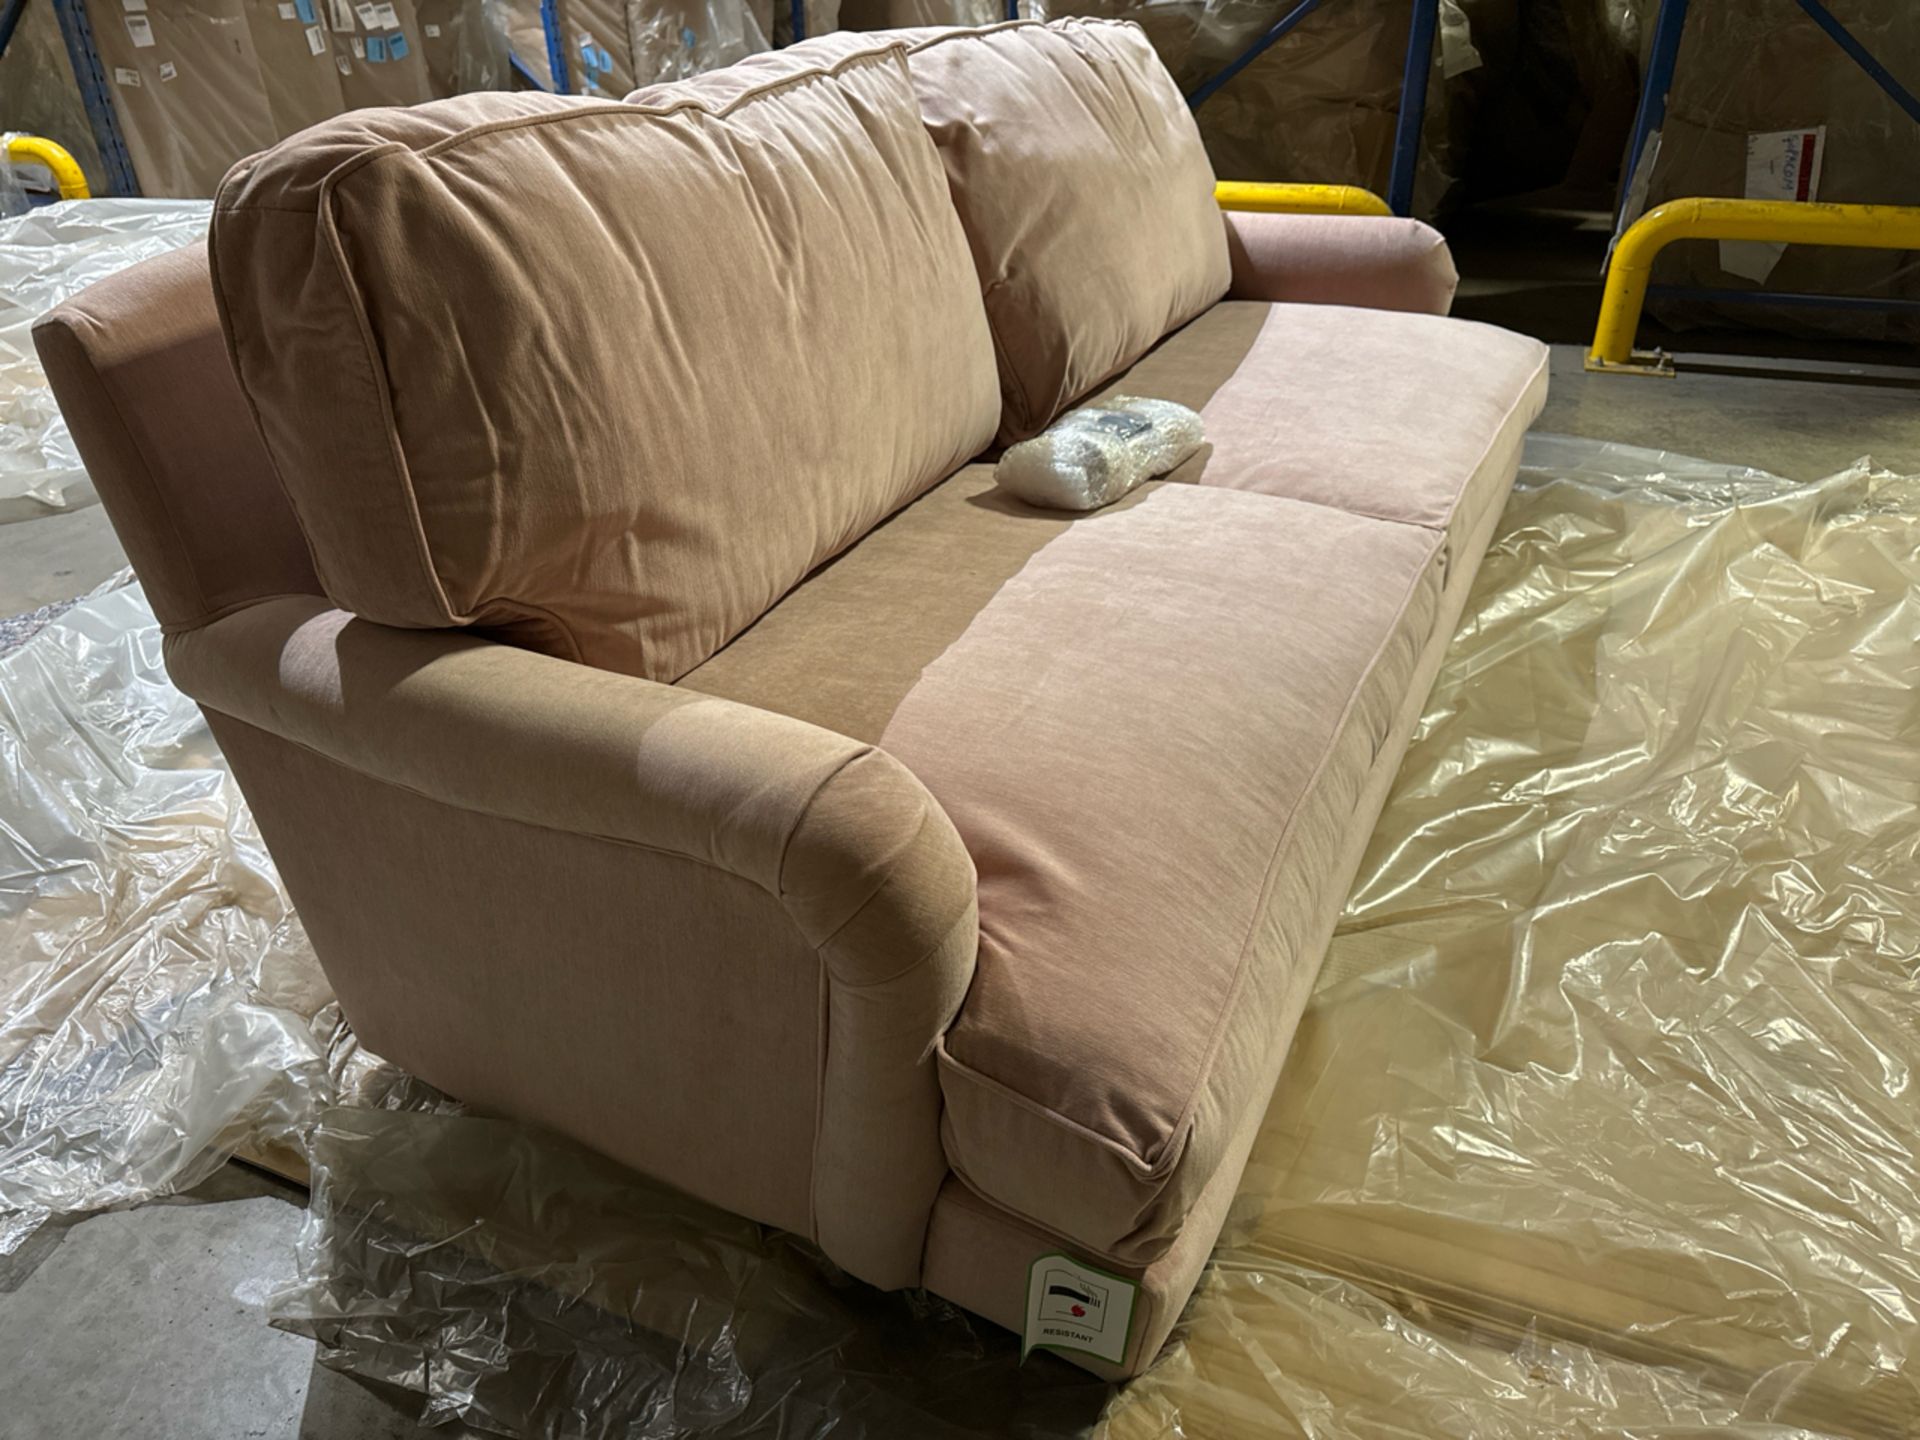 Bluebell 3 Seat Sofa In Pavilion Pink Brushstroke RRP - £1780 - Image 3 of 6